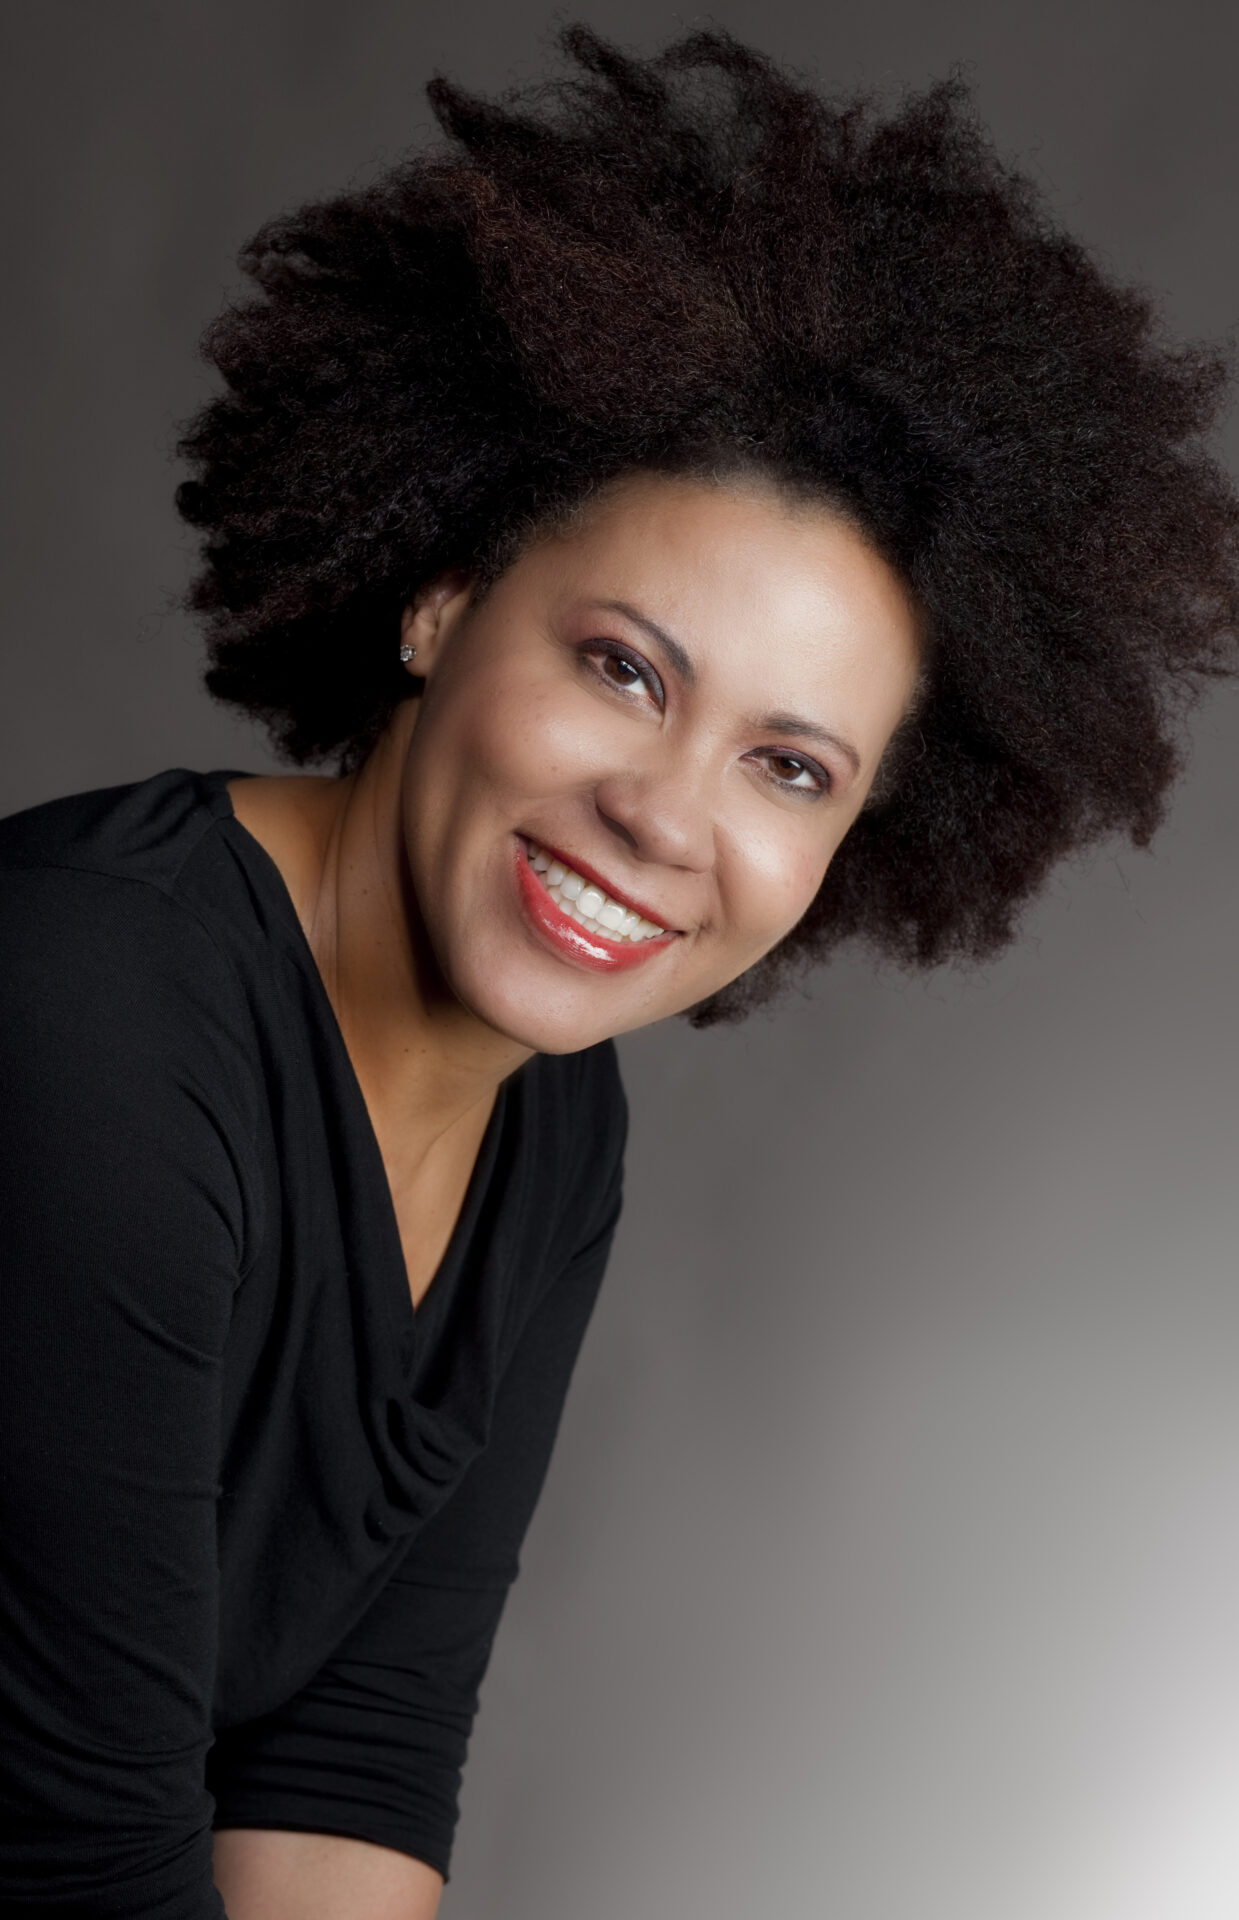 A woman with afro hair smiling for the camera.